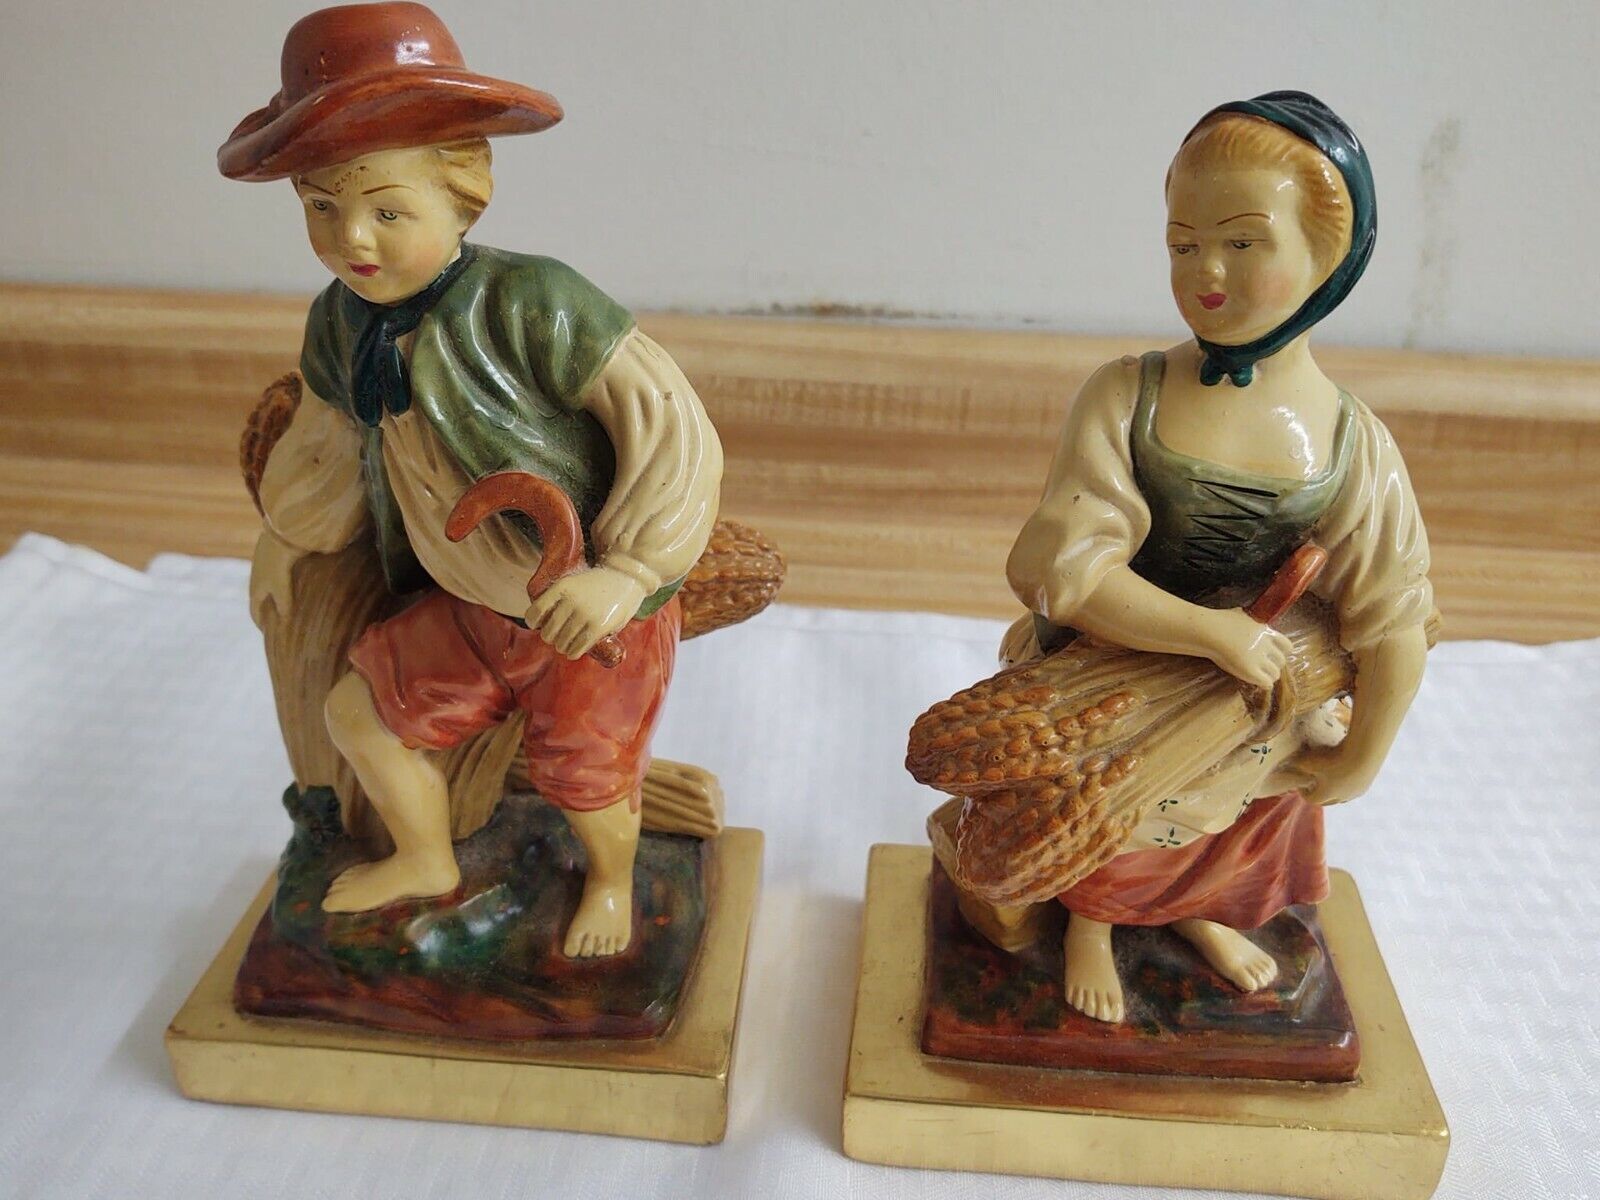 Vintage Country French man/woman figurines; plaster, gold leaf bases.